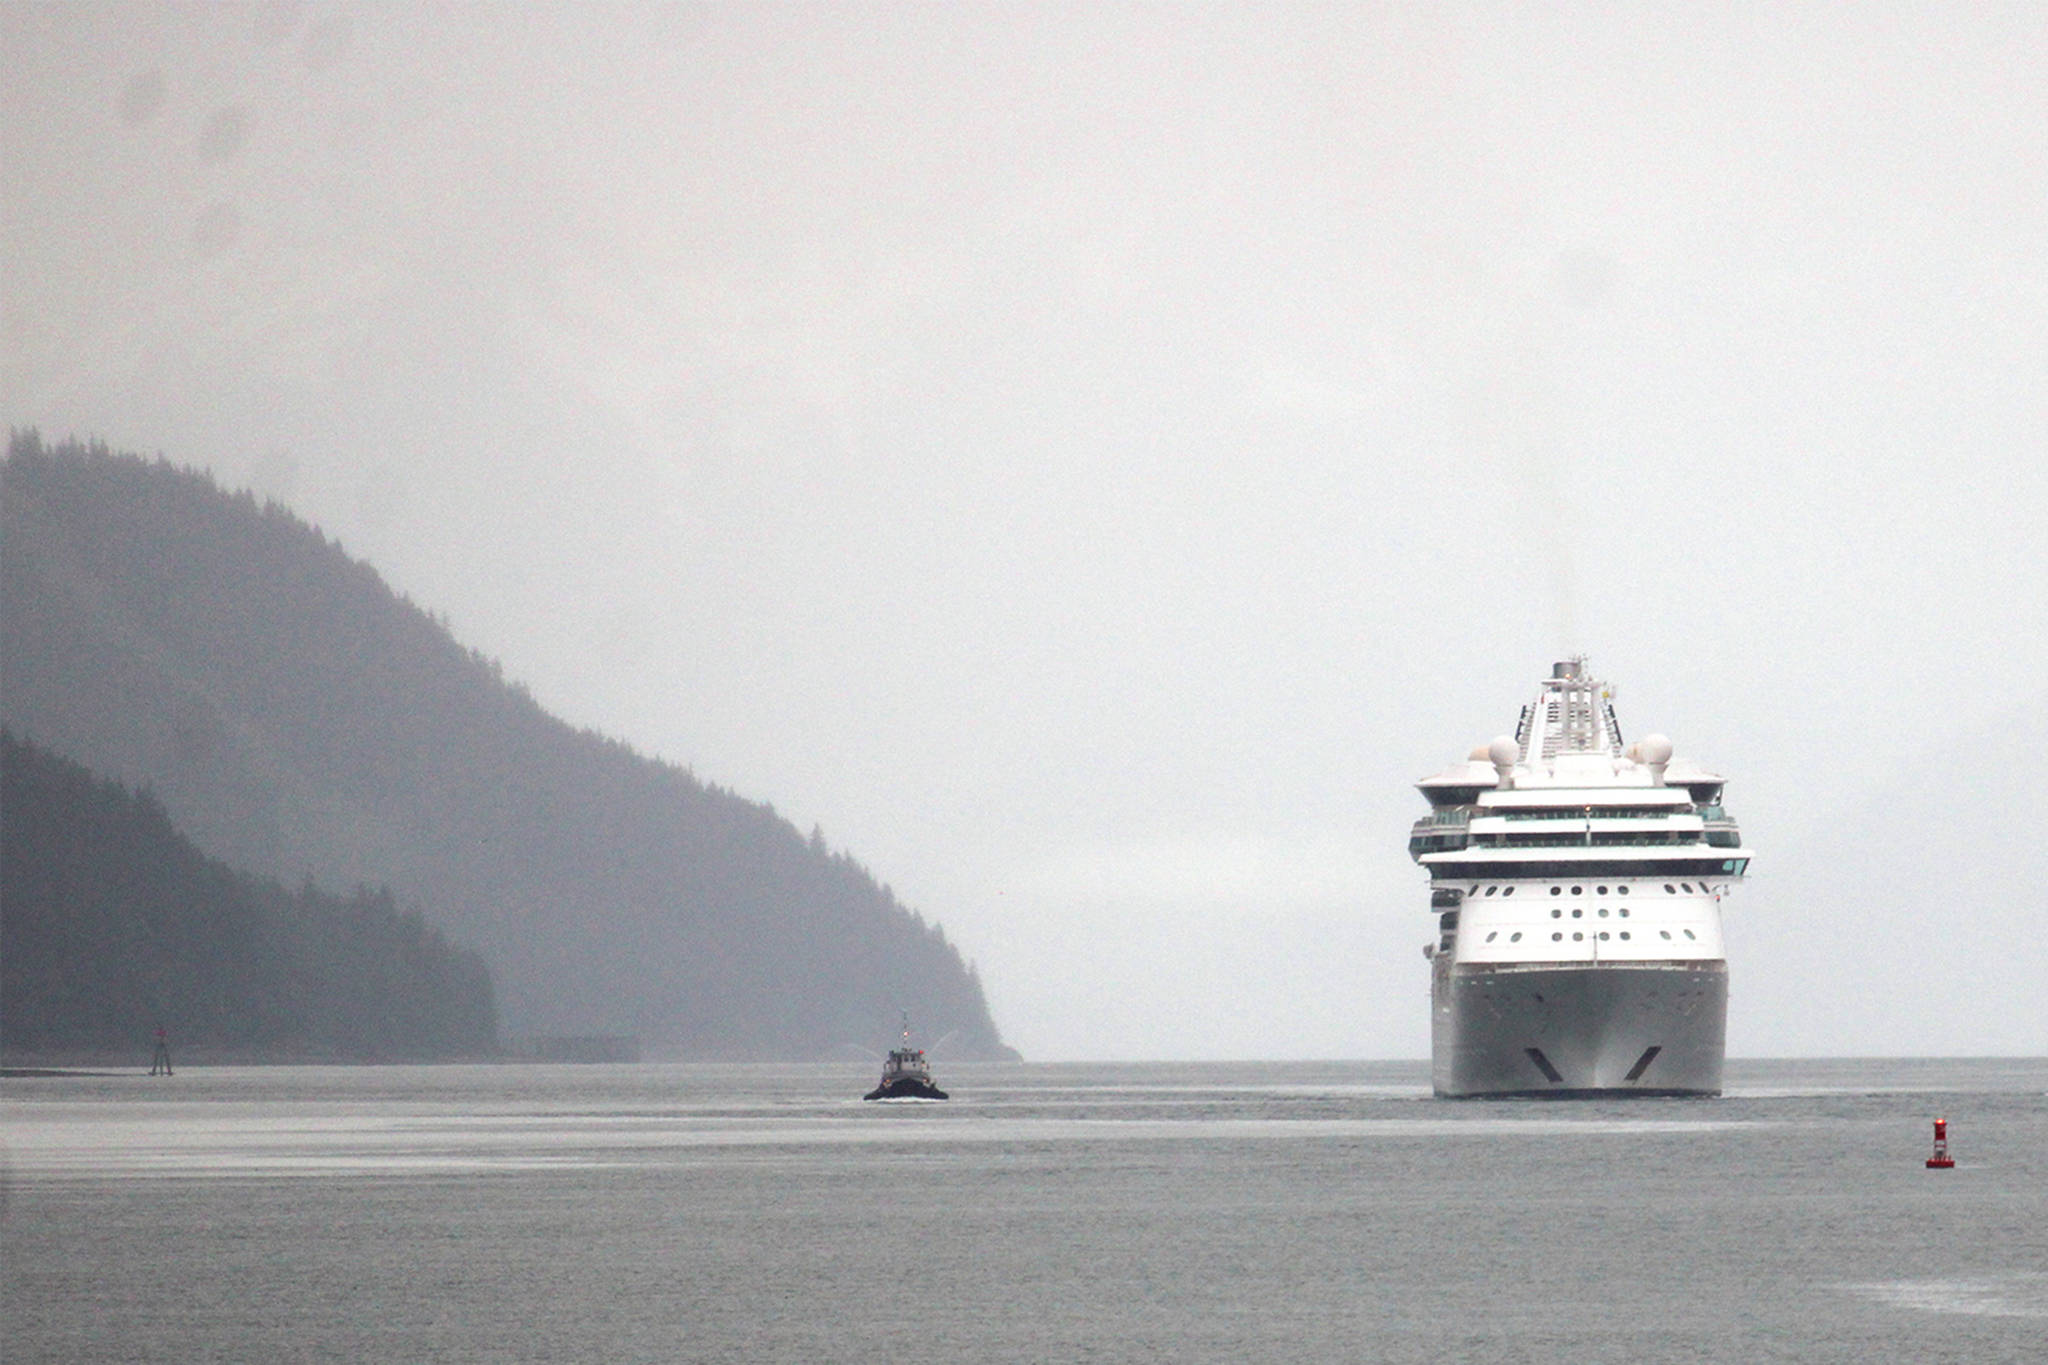 The Serenade of the Seas arrives in Juneau early Friday morning. The Royal Caribbean cruise ship is the first large cruise ship to come to Juneau since the pandemic caused the cancellation of the 2020 cruise ship season and delayed the 2021 season. (Dana Zigmund / Juneau Empire)